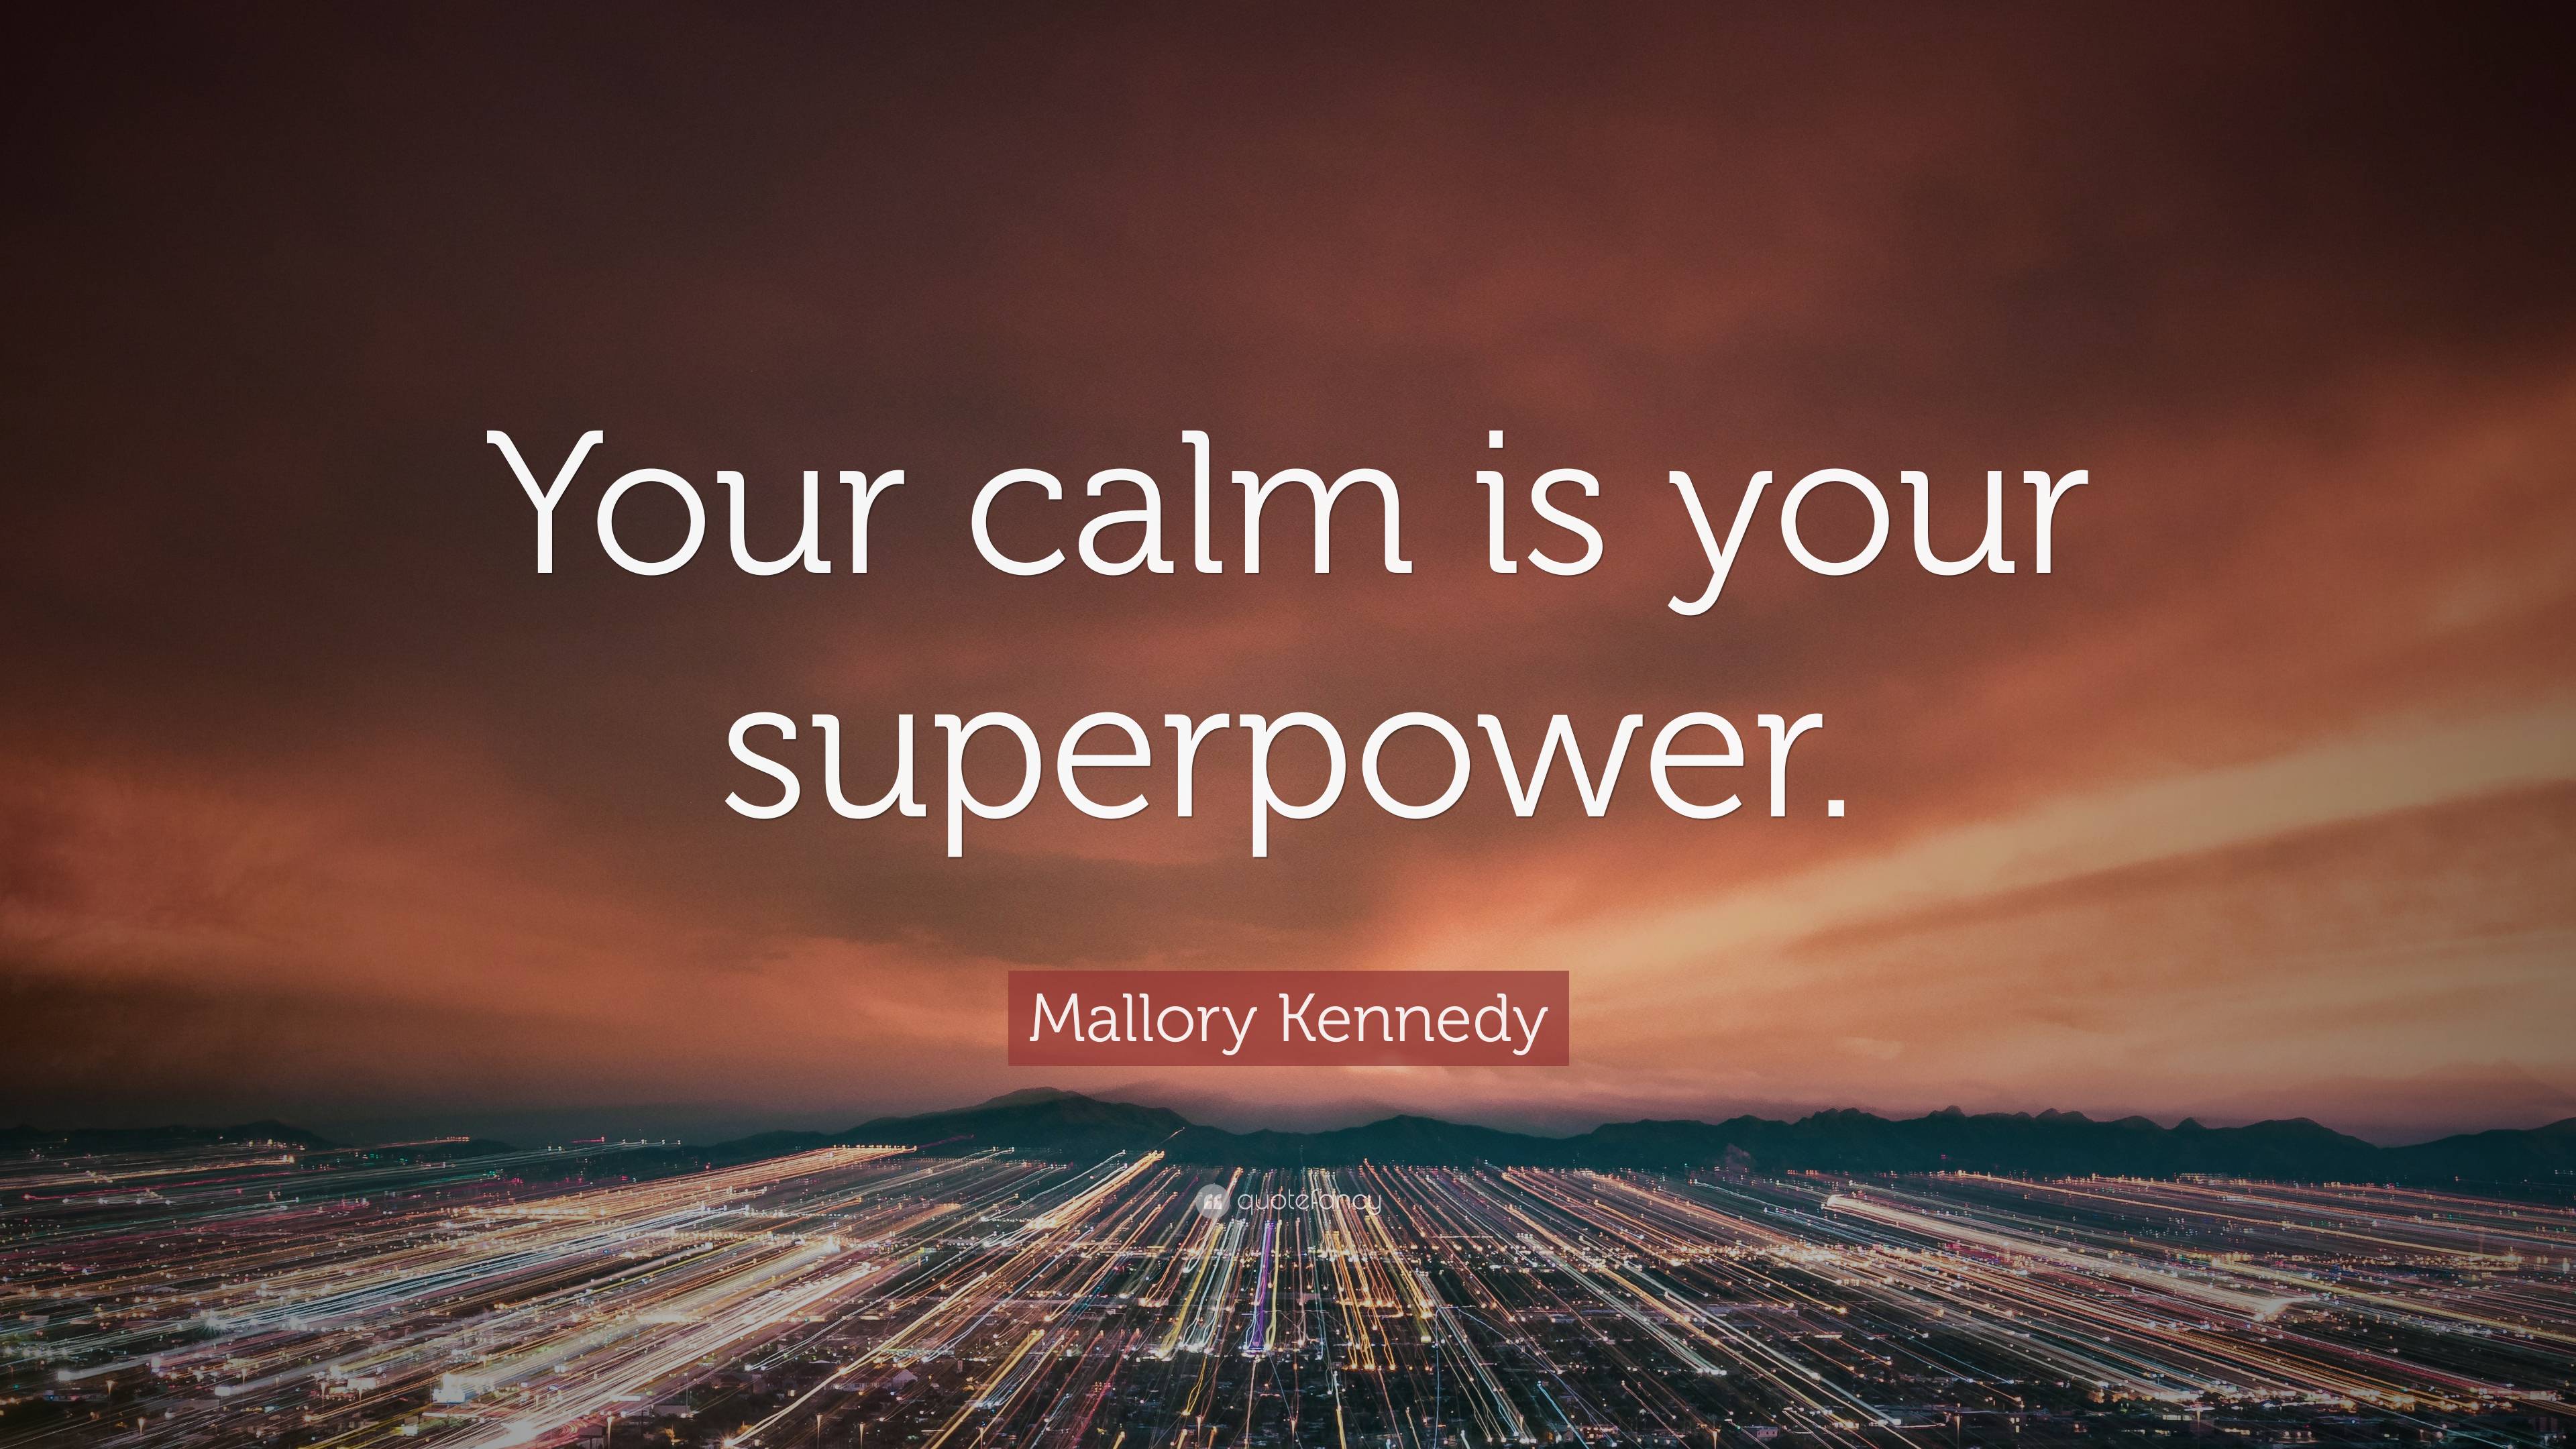 Mallory Kennedy Quote: “Your calm is your superpower.”